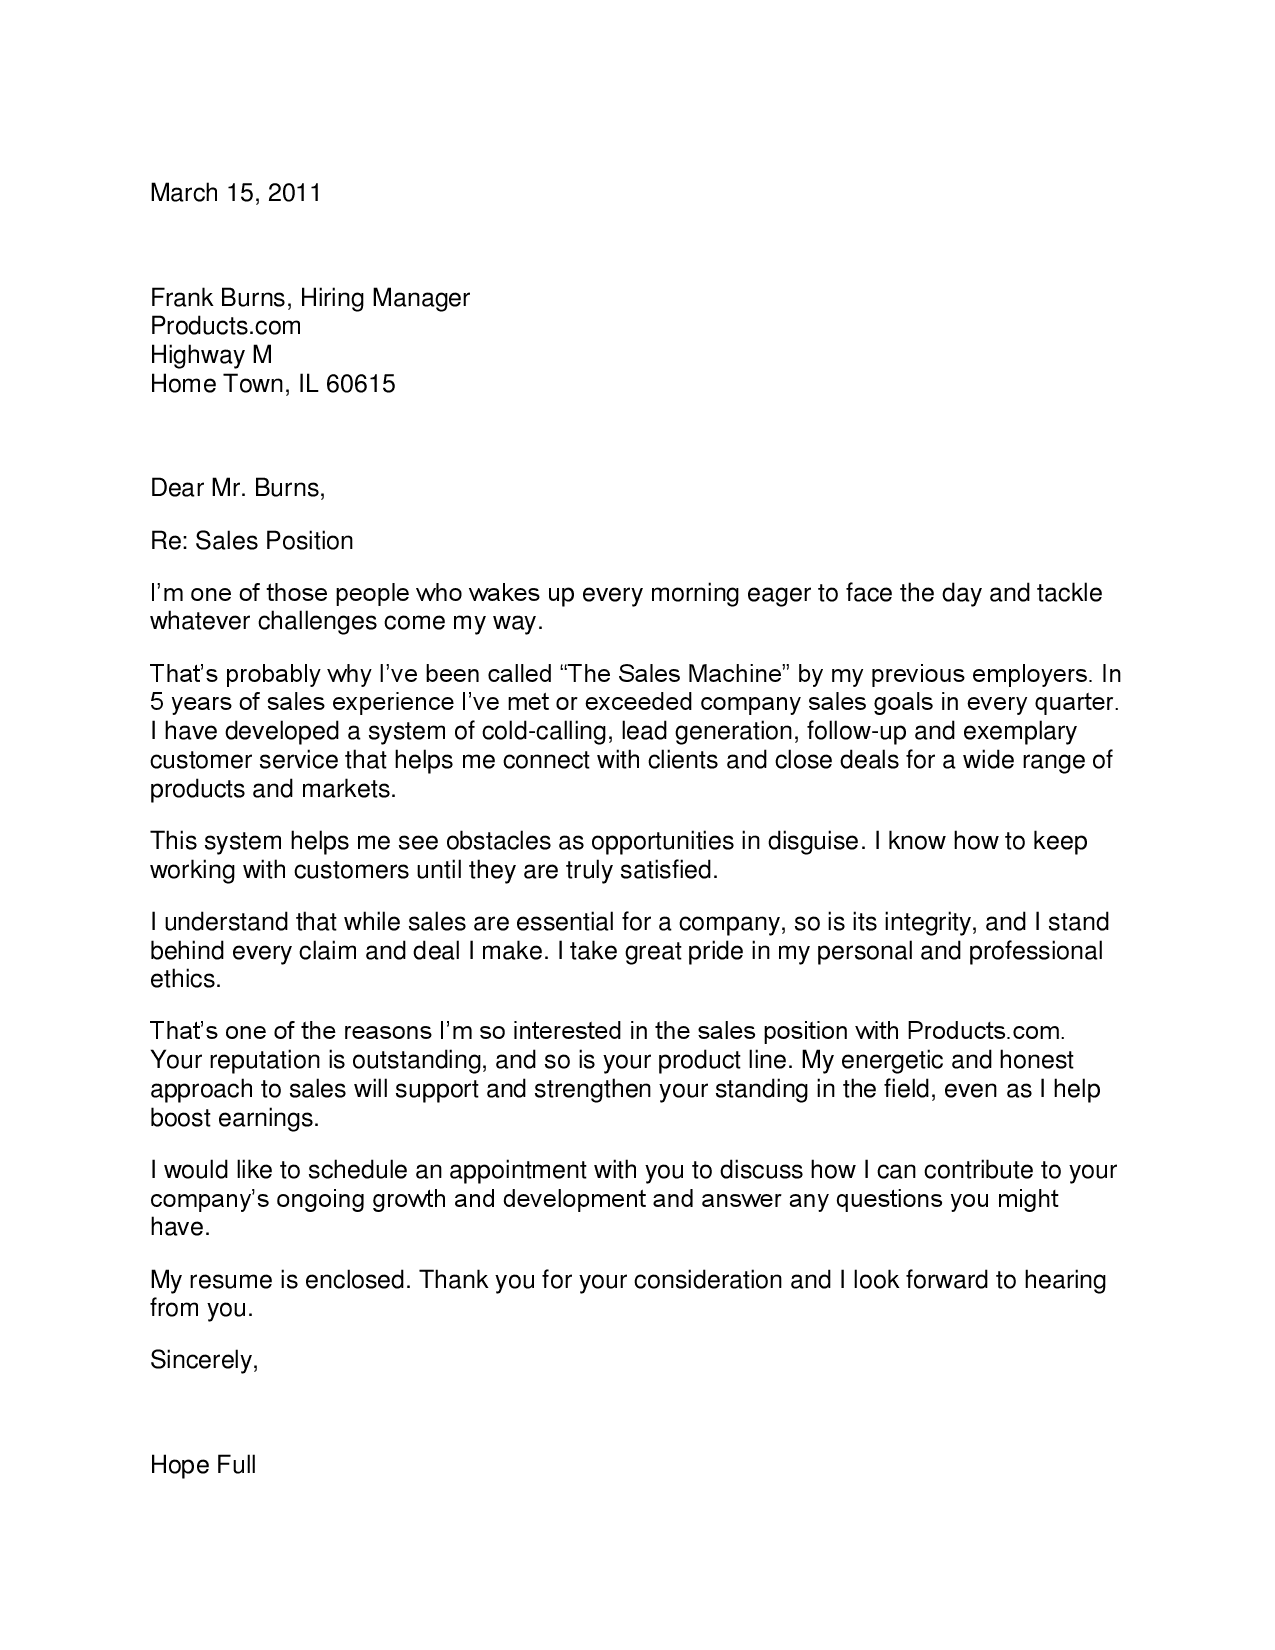 District retail manager cover letter